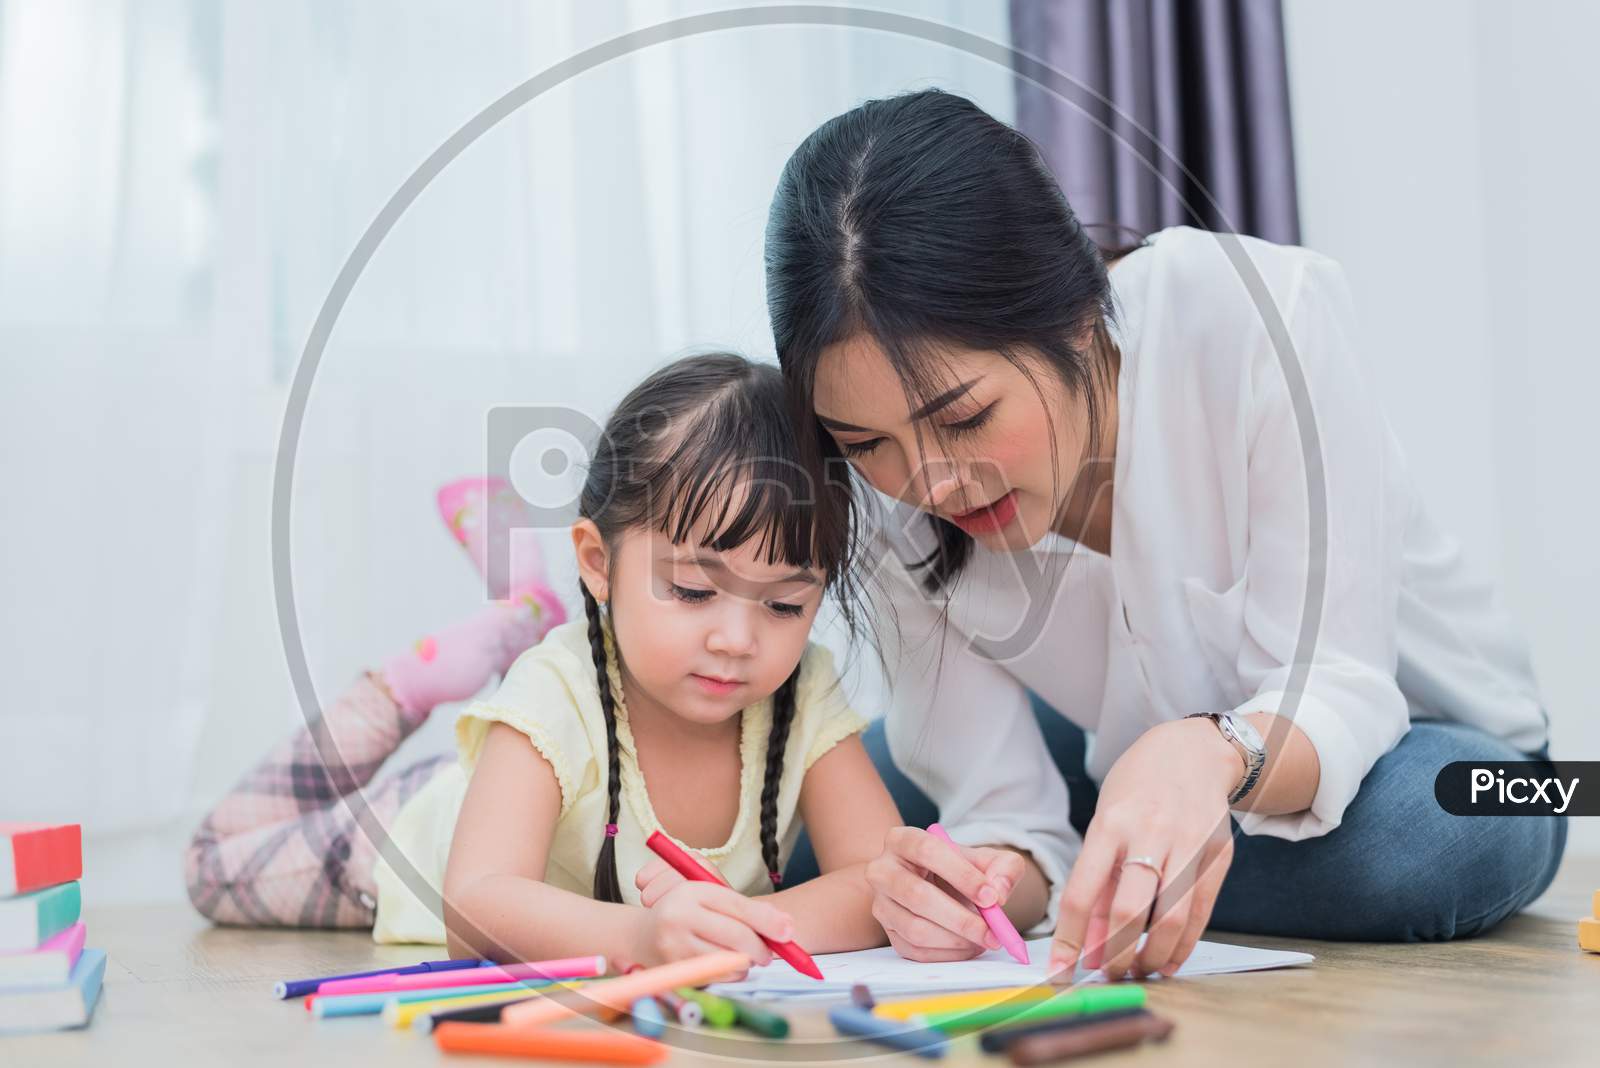 Mom Teaching Her Daughter To Drawing In Art Class. Back To School And Education Concept. Children And Kids Theme. Home Sweet Home Theme.